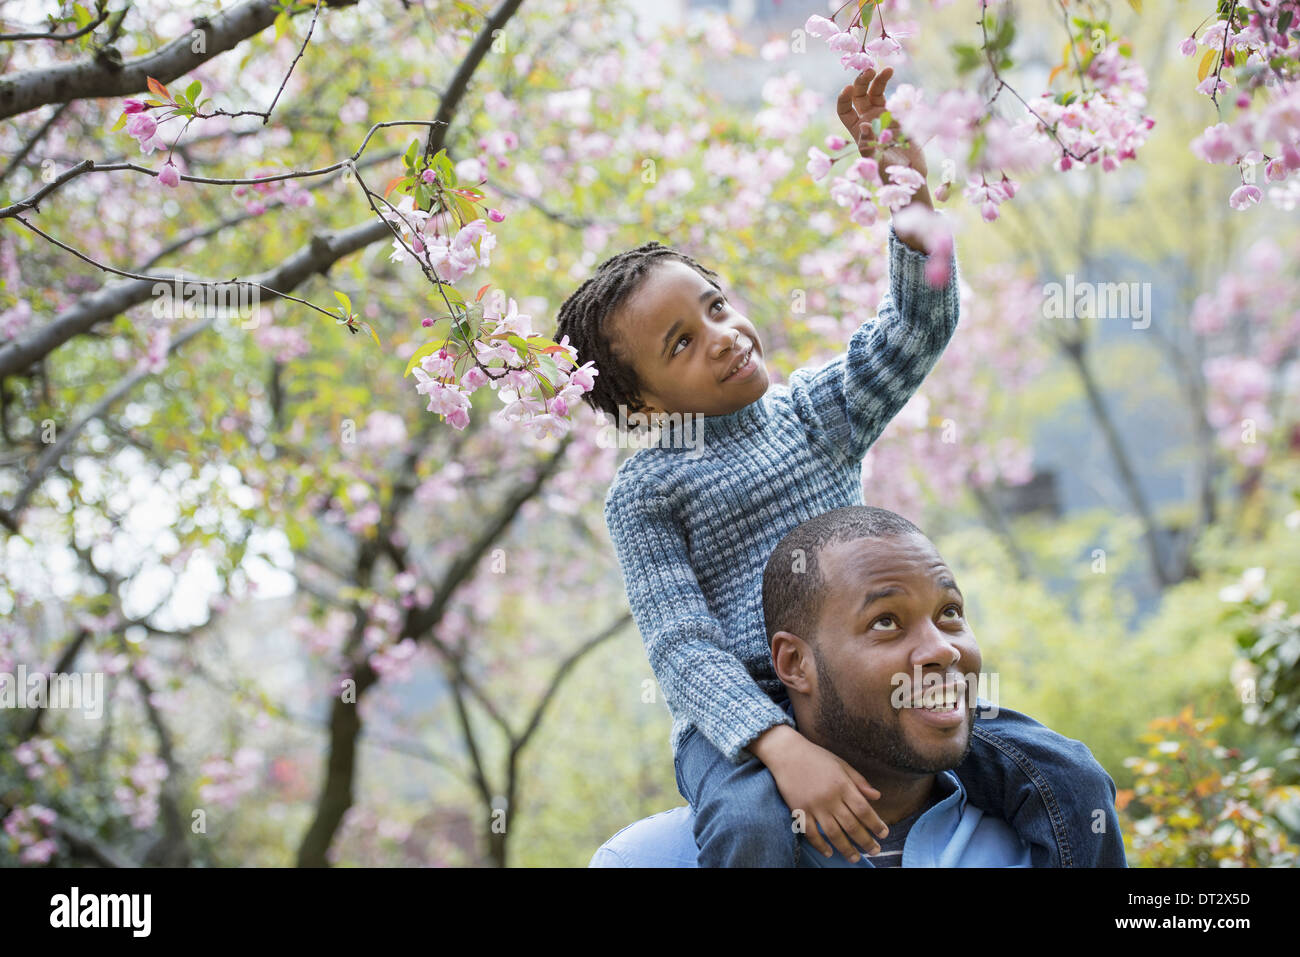 Sunshine and cherry blossom A father giving his son a ride on his shoulders Stock Photo